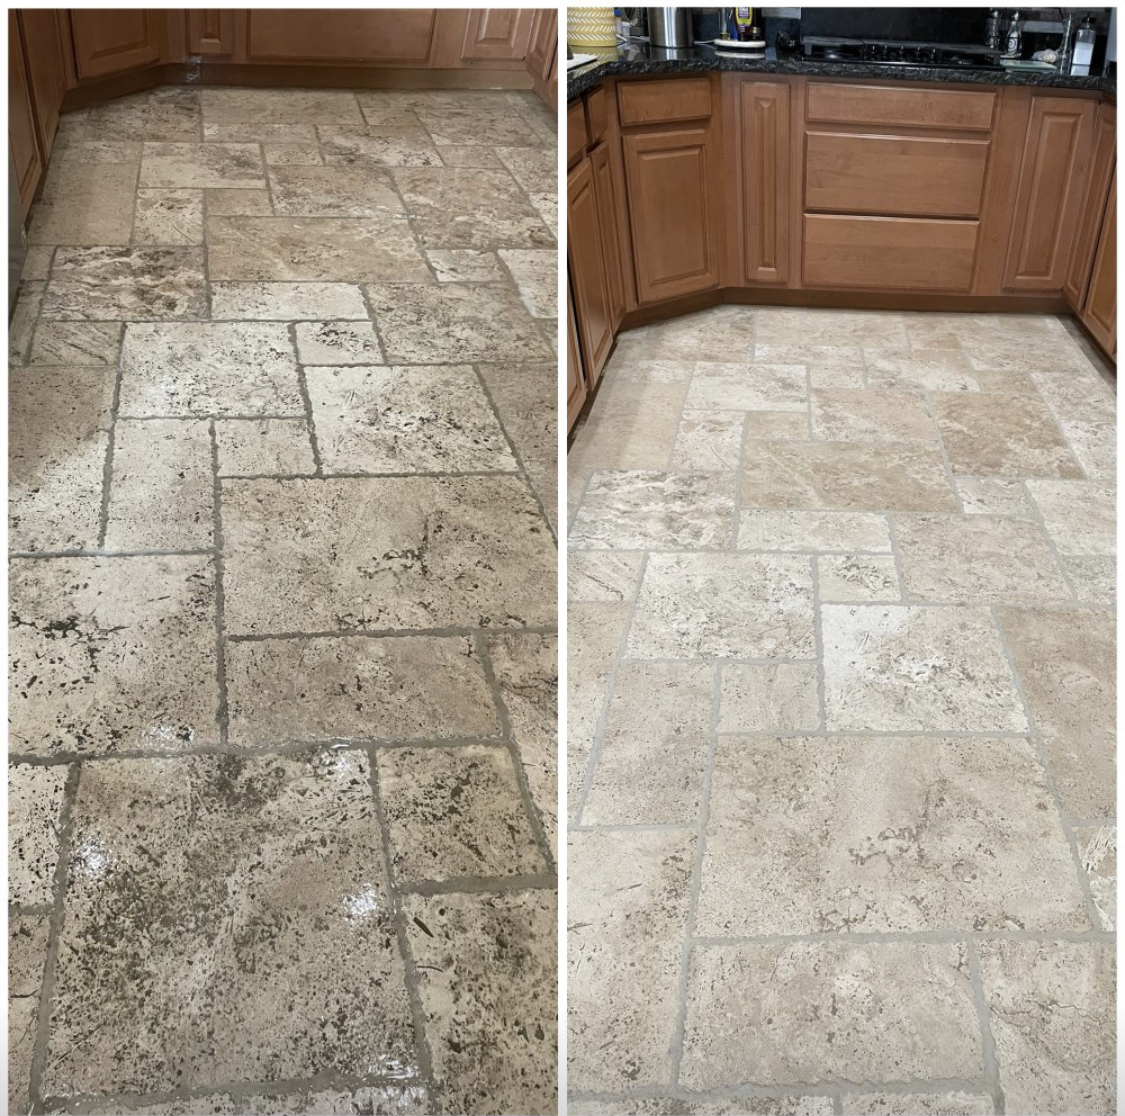 Tile and Grout cleaning Scottsdale AZ